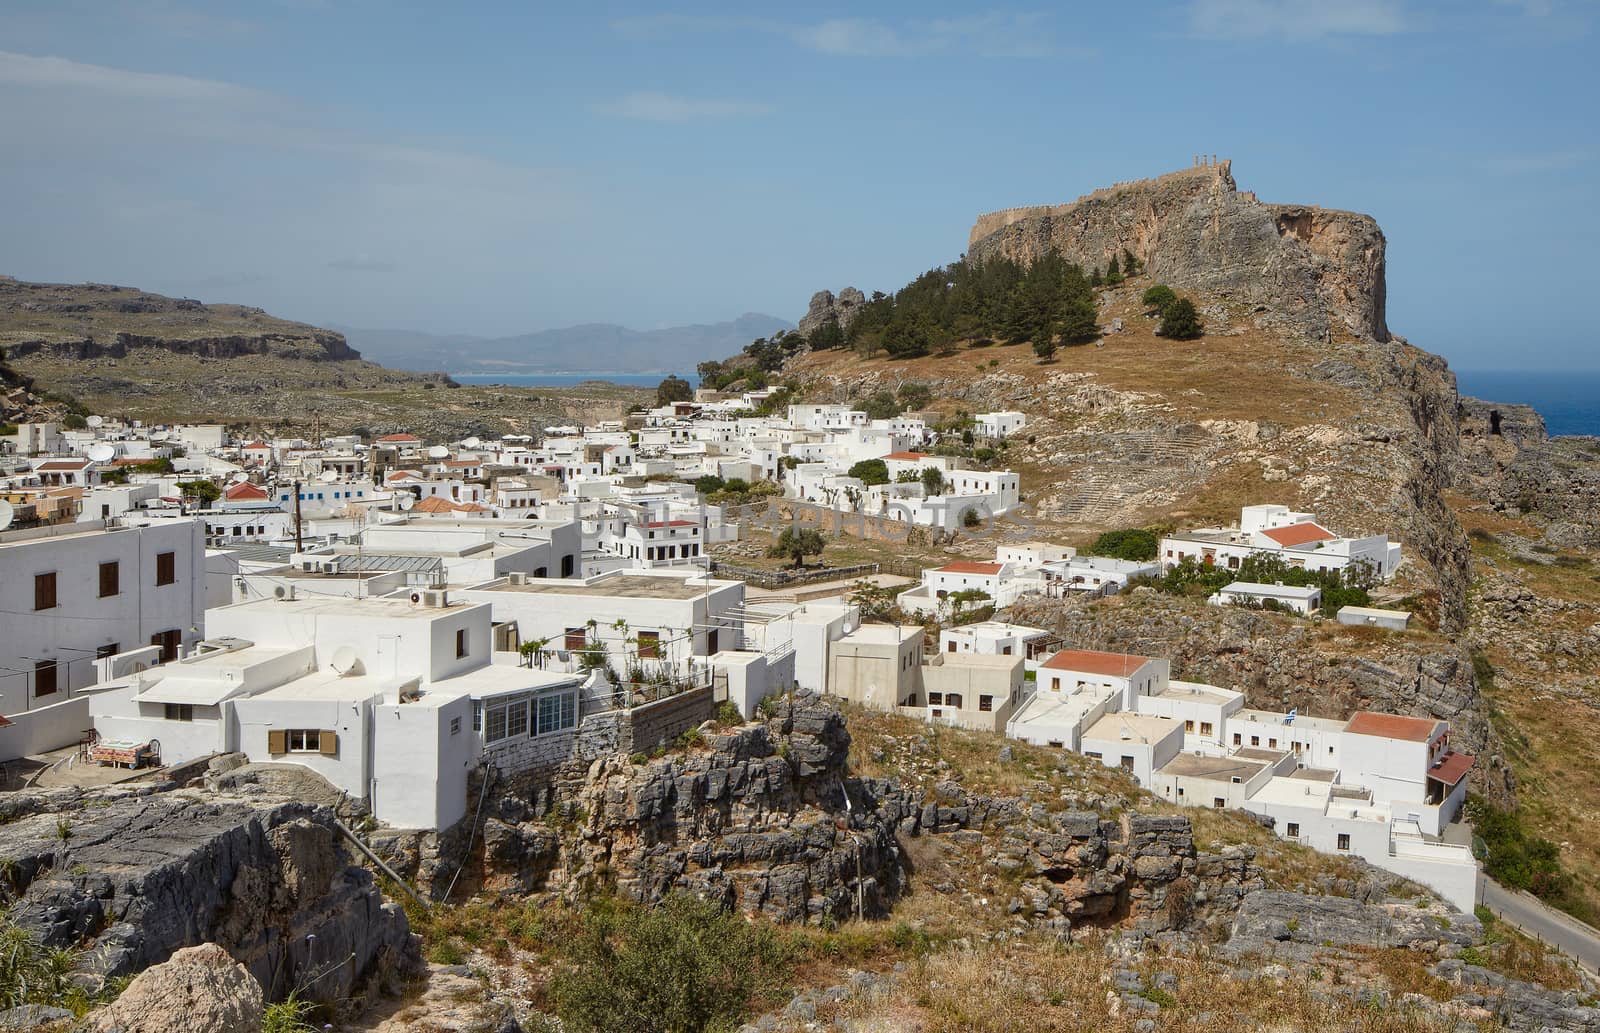 Picturesque whitewashed village of Lindos in the Dodecanese island of Rhodes, Greece.